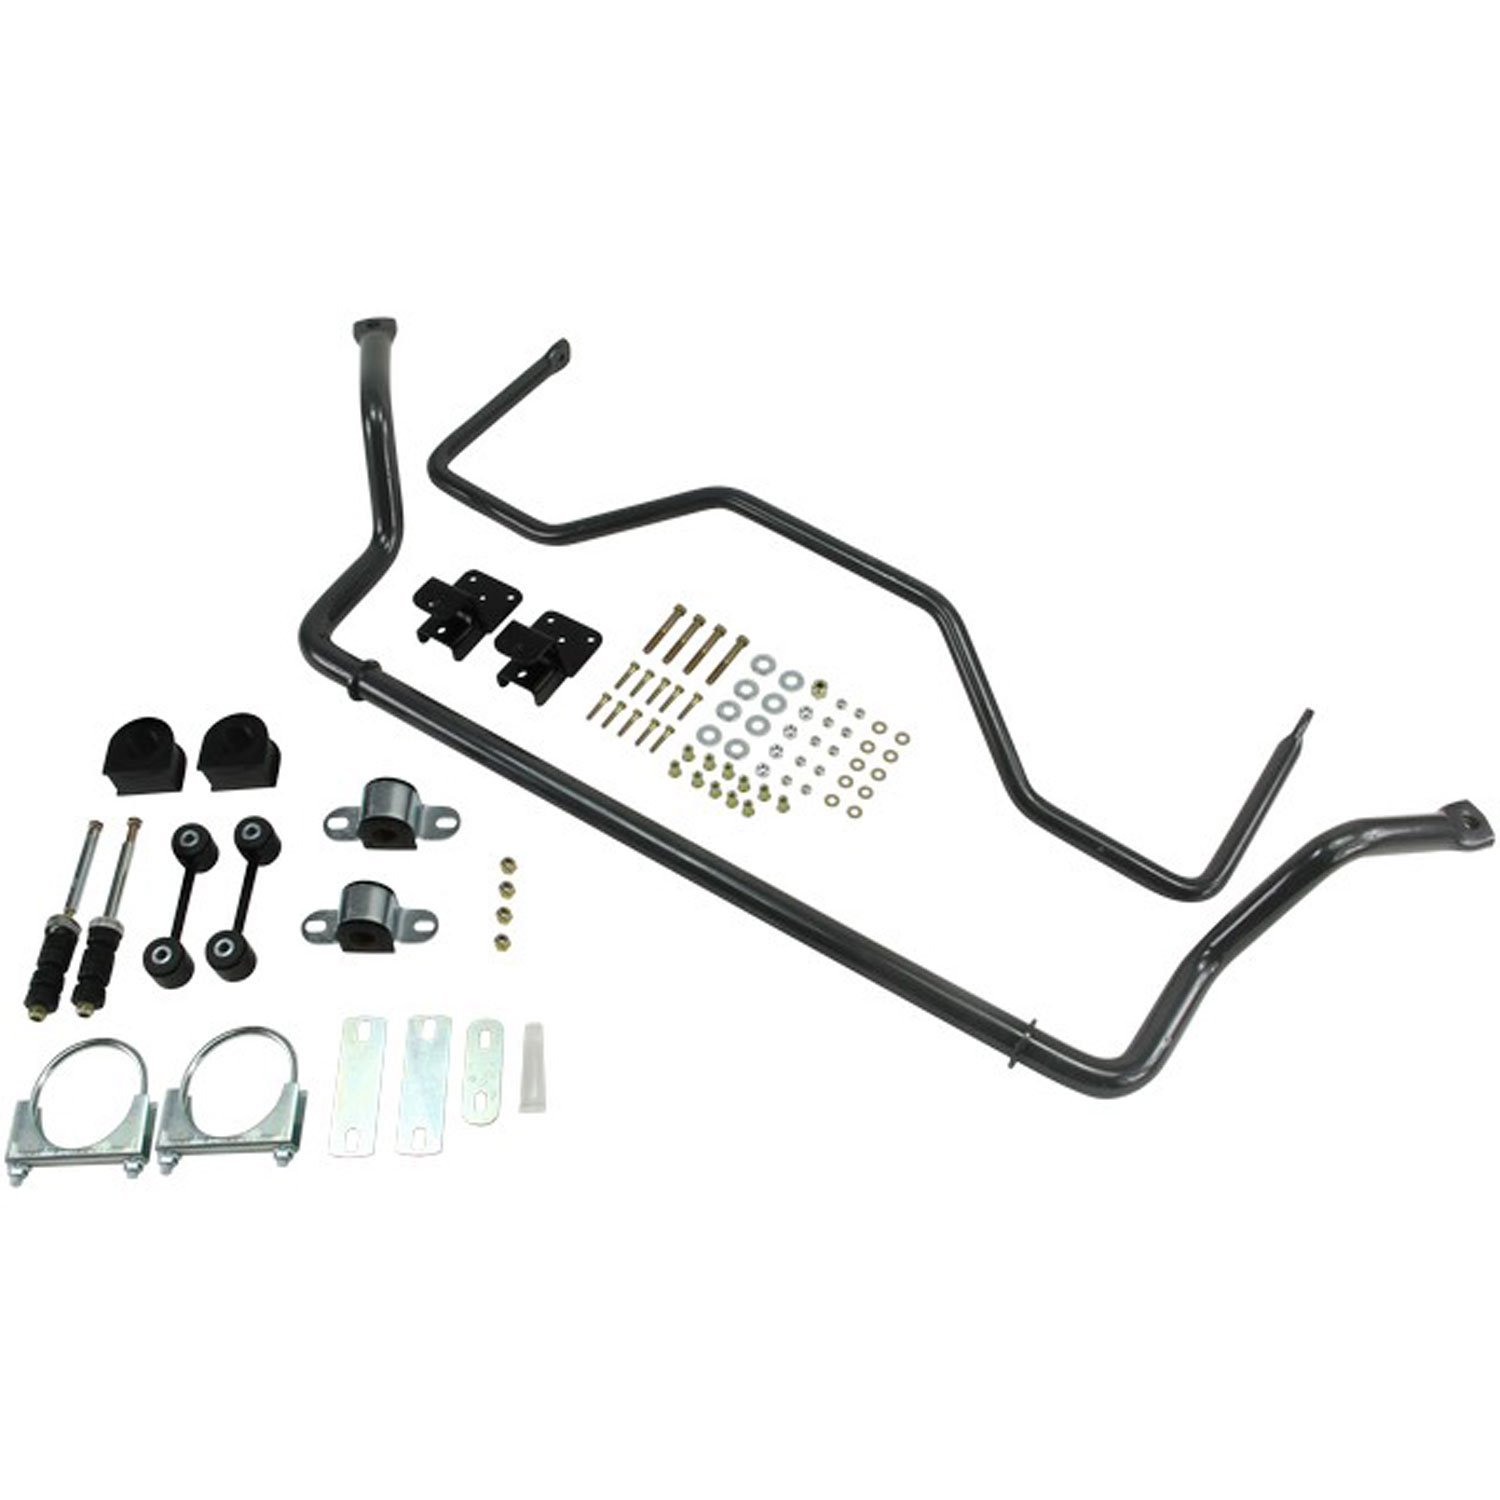 Front/Rear Sway Bar Kit for 1997-2003 Ford F150